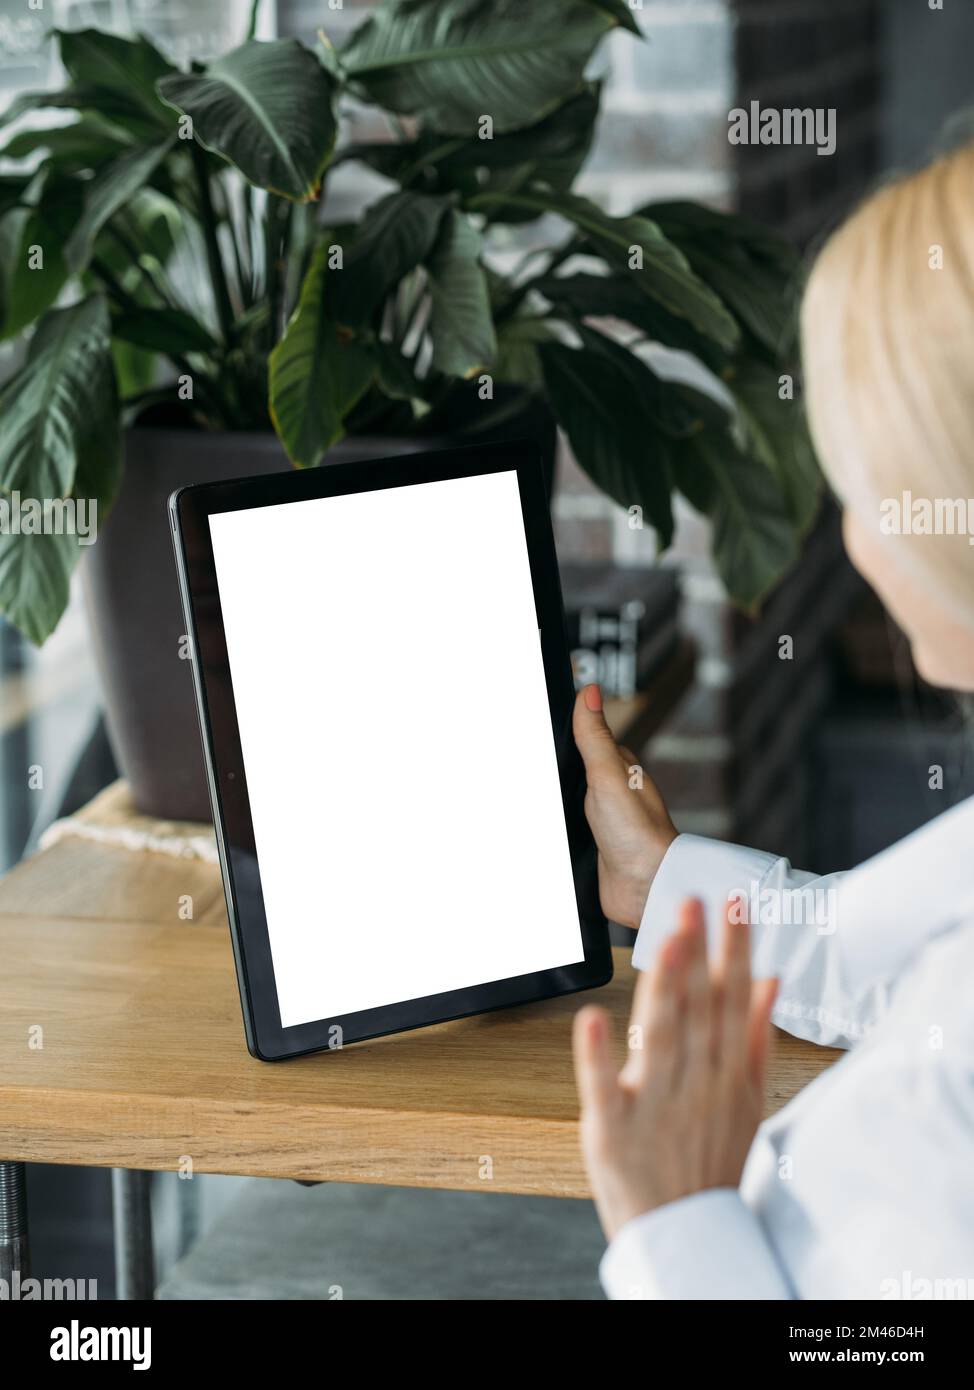 online conference office woman digital mockup Stock Photo